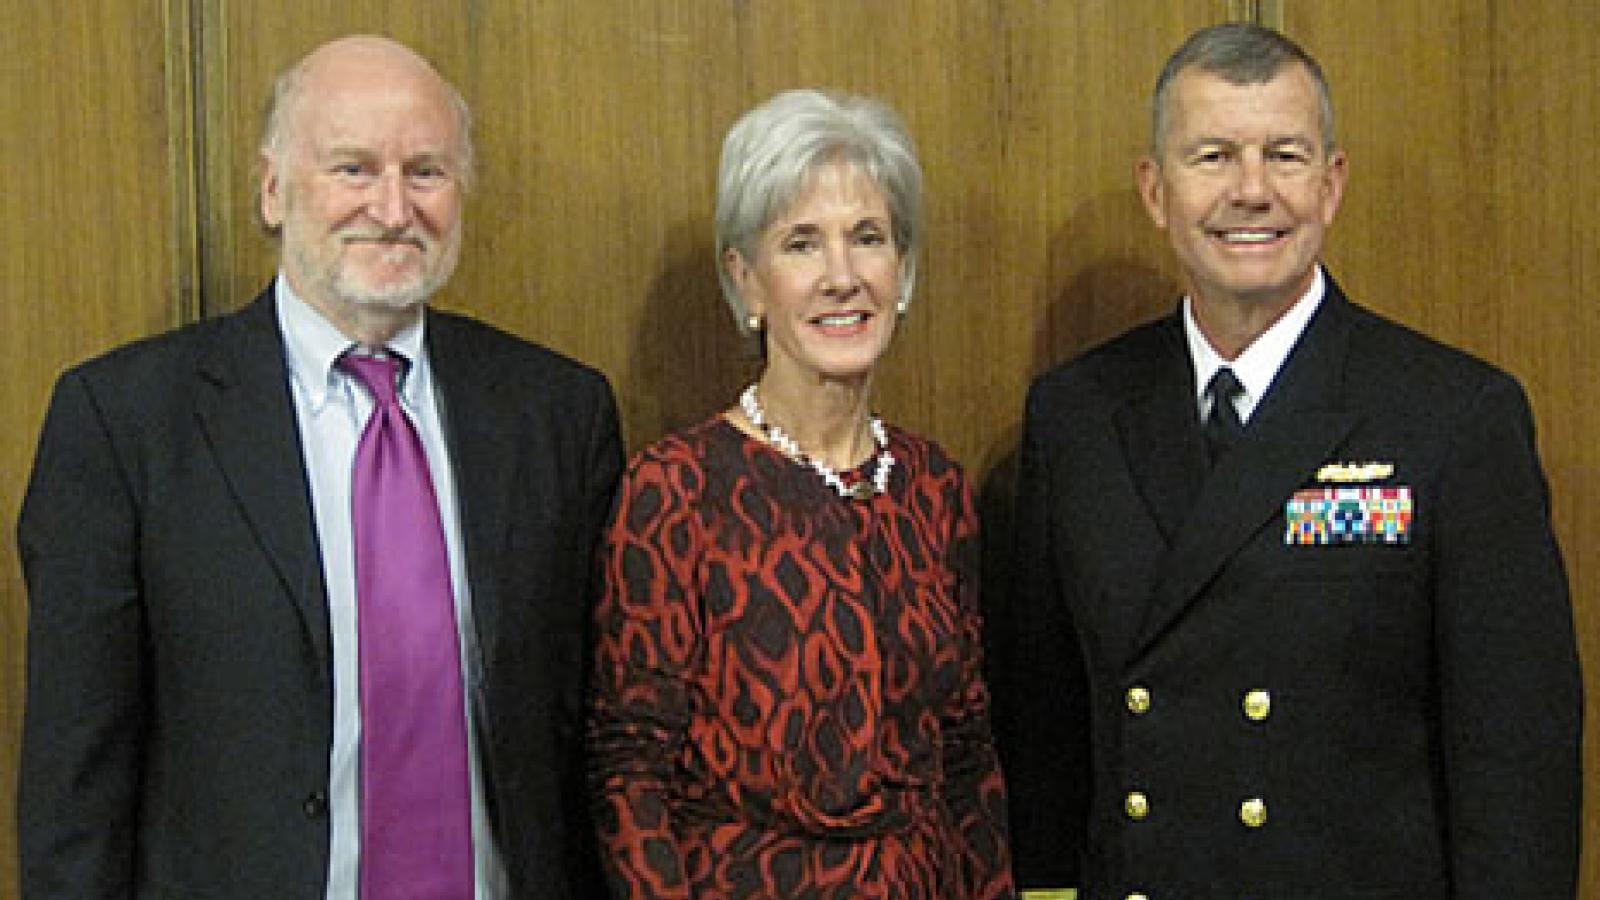 NEA Chairman Rocco Landesman, Health and Human Services Secretary Kathleen Sebelius, and Rear Admiral Alton L. Stocks, Commander, Walter Reed National Military Medical Center Bethesda, were at The John F. Kennedy Center For The Performing Arts to announce